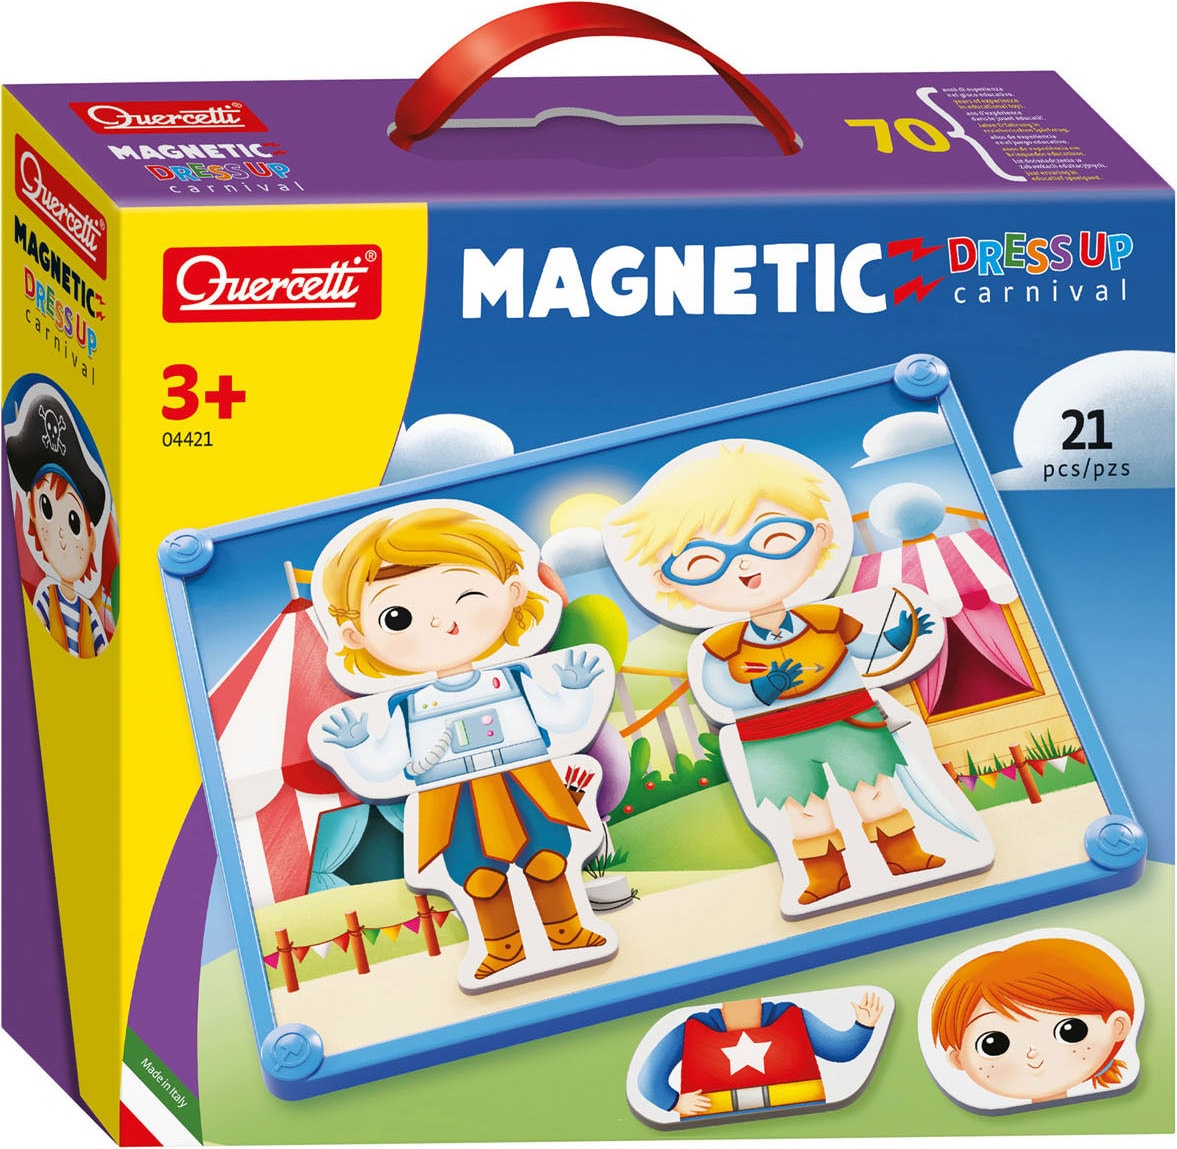 Quercetti Magnetisches Anziehpuzzle (480213)